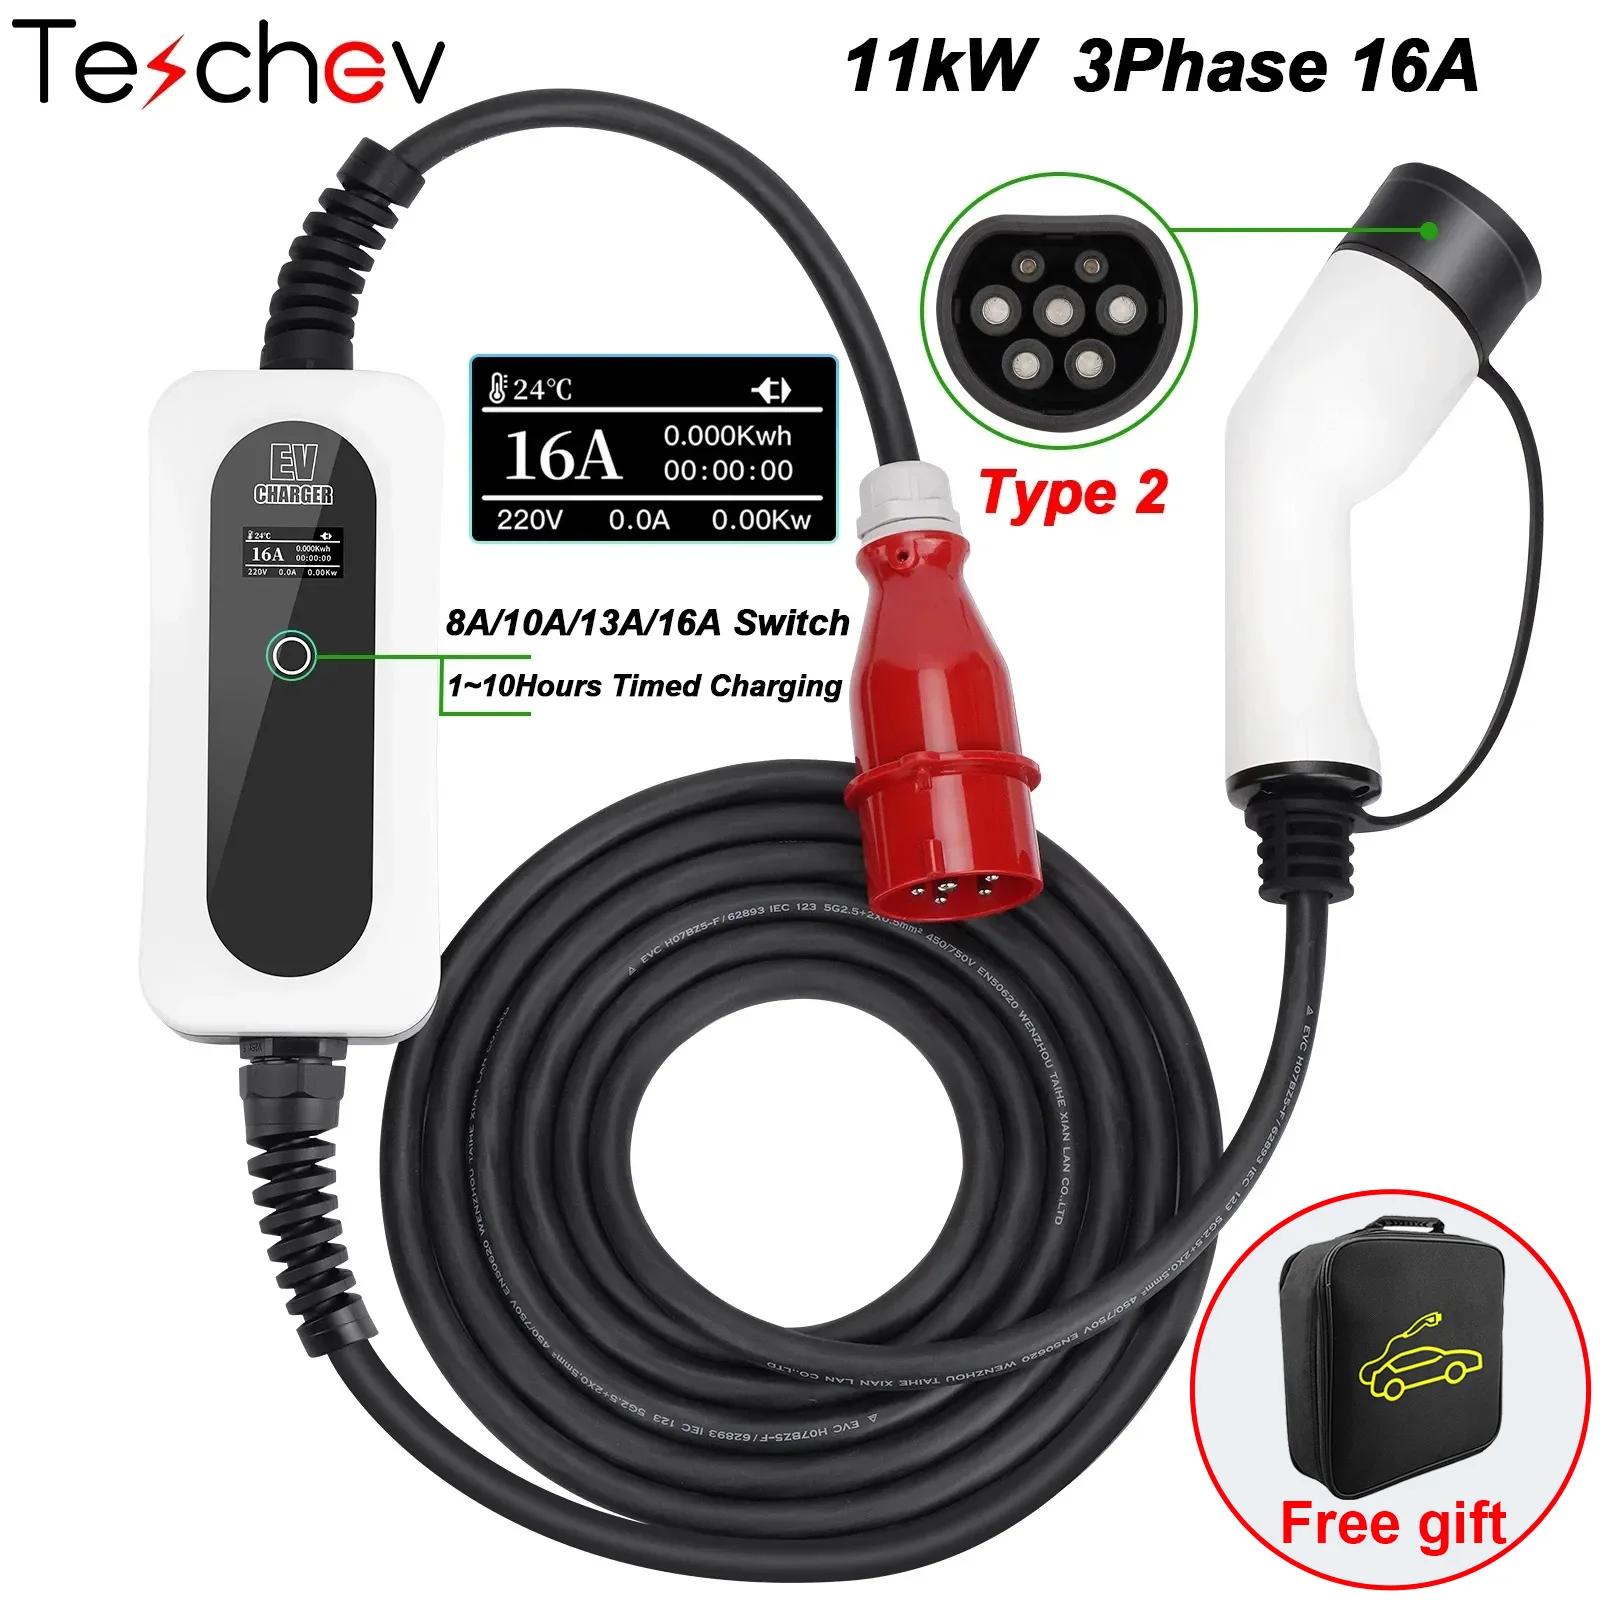 

Teschev 11KW EV Charger Type2 3 Phase 16A IEC 62196 CEE Red Plug Portable Charger Fast Charging EVSE Electric Vehicles 5M Cable